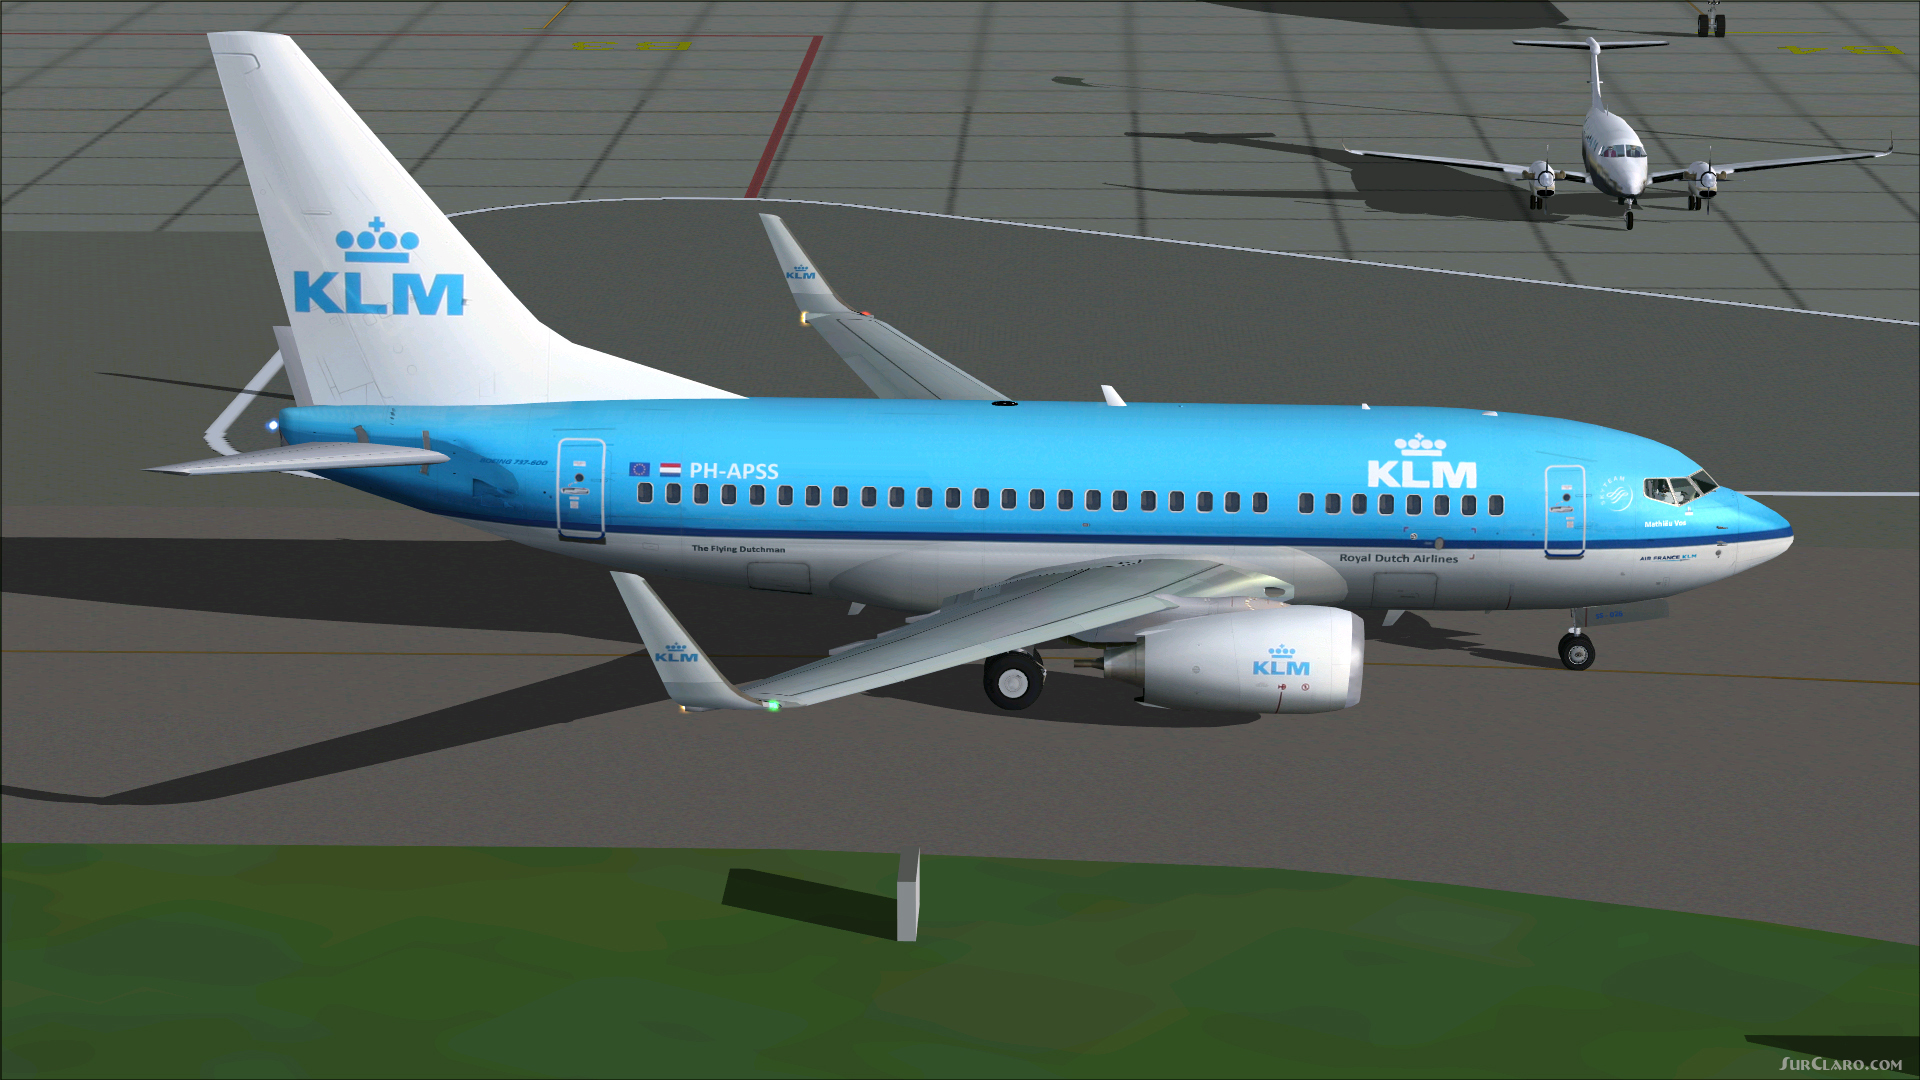 Project Opensky - Boeing 737-600w KLM image 3.